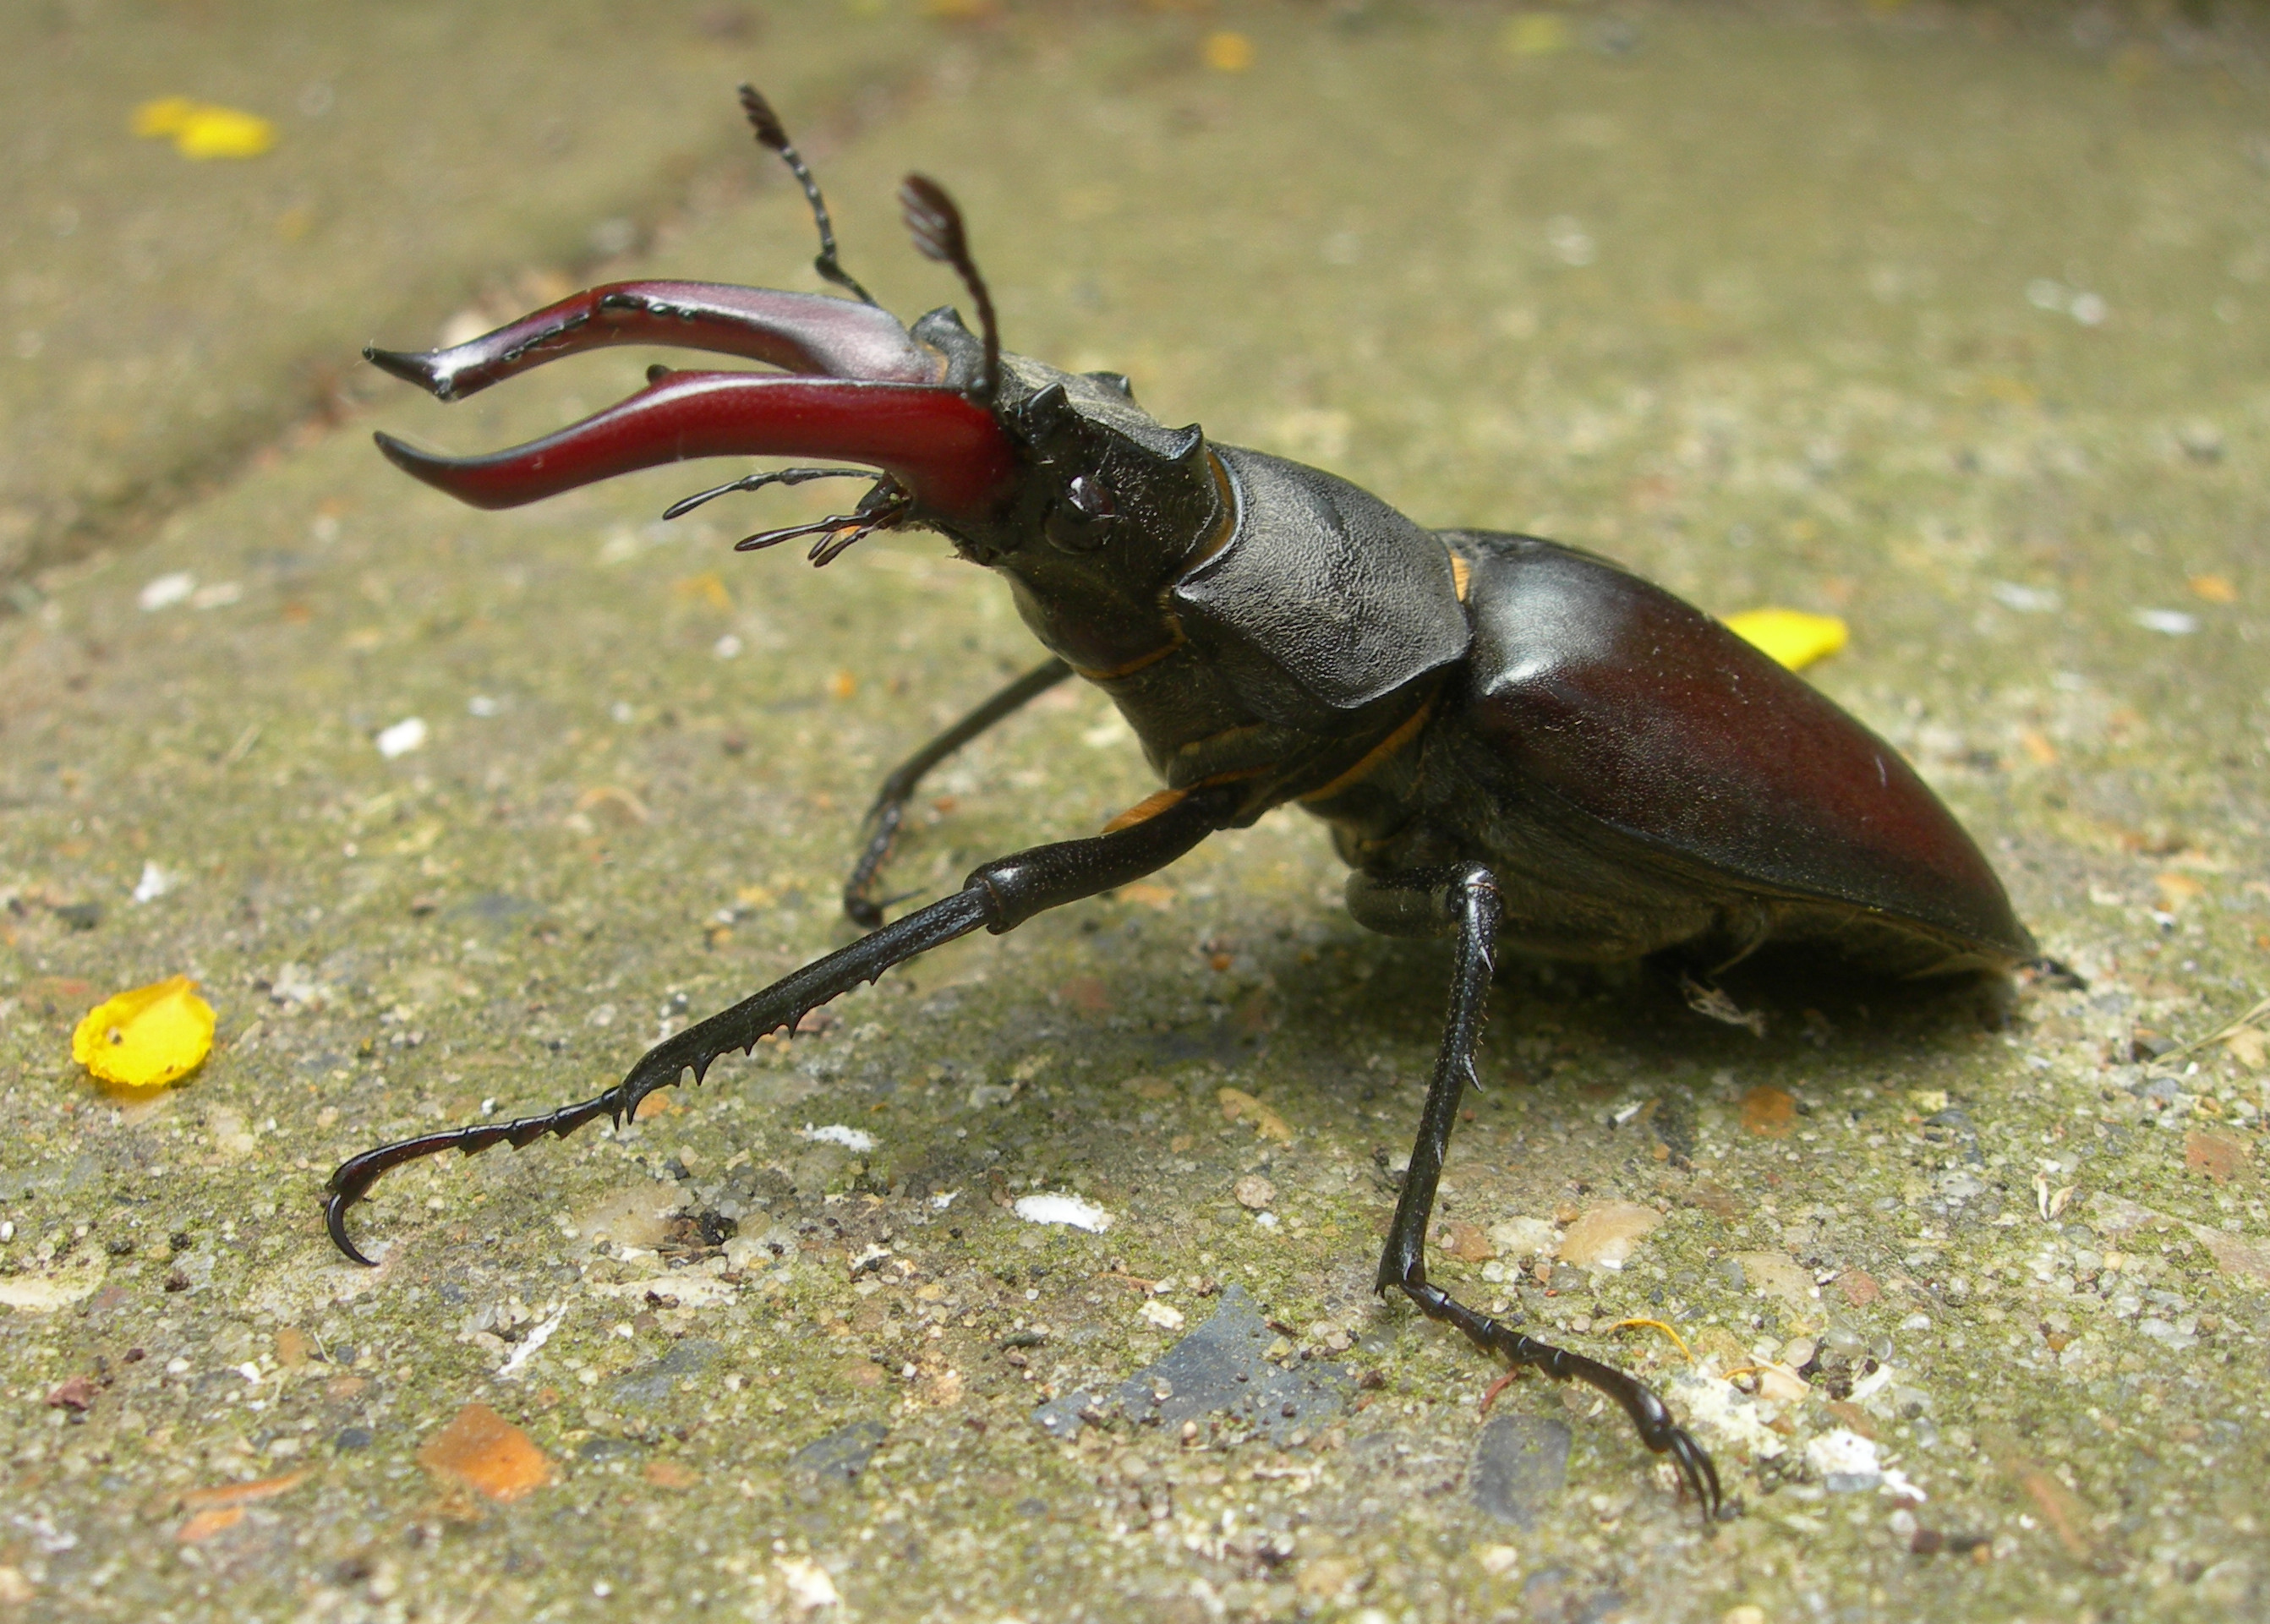 34. Find a stag beetle